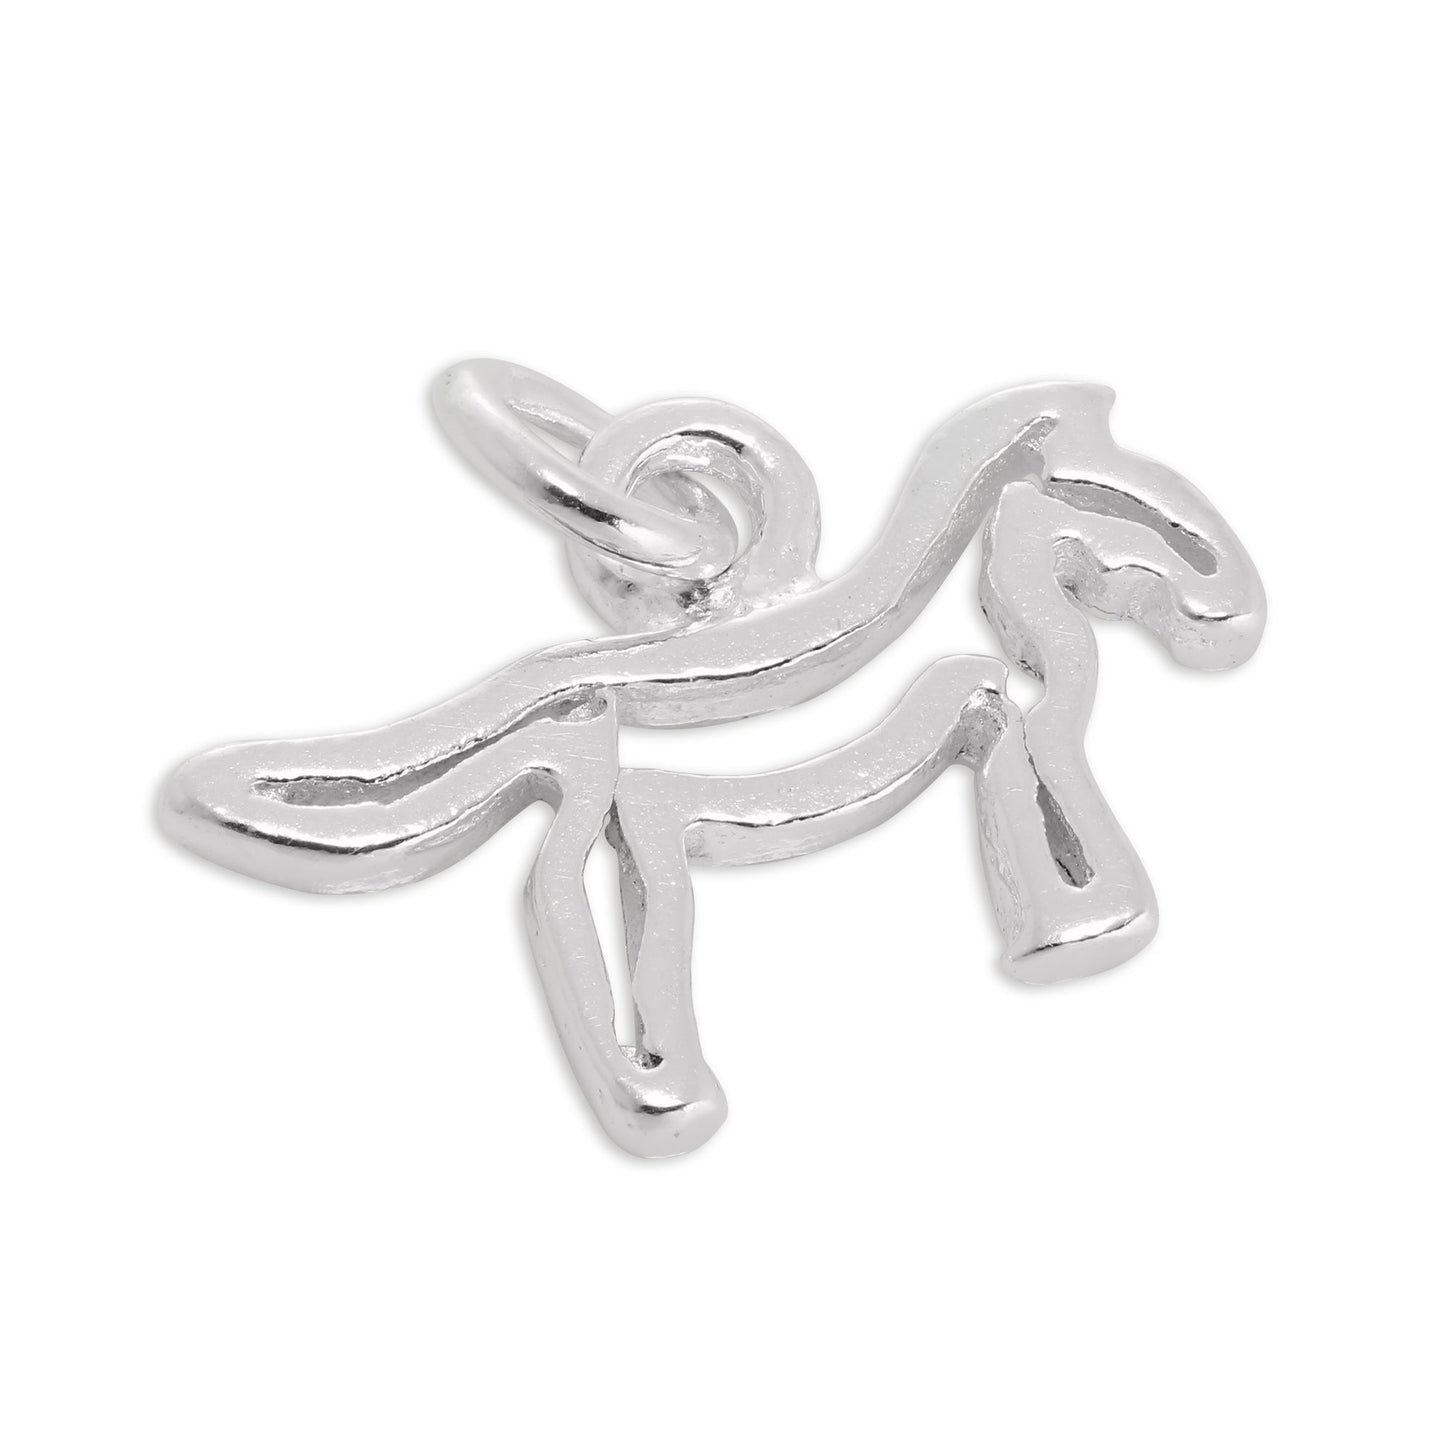 Tiny Sterling Silver Horse Outline Charm